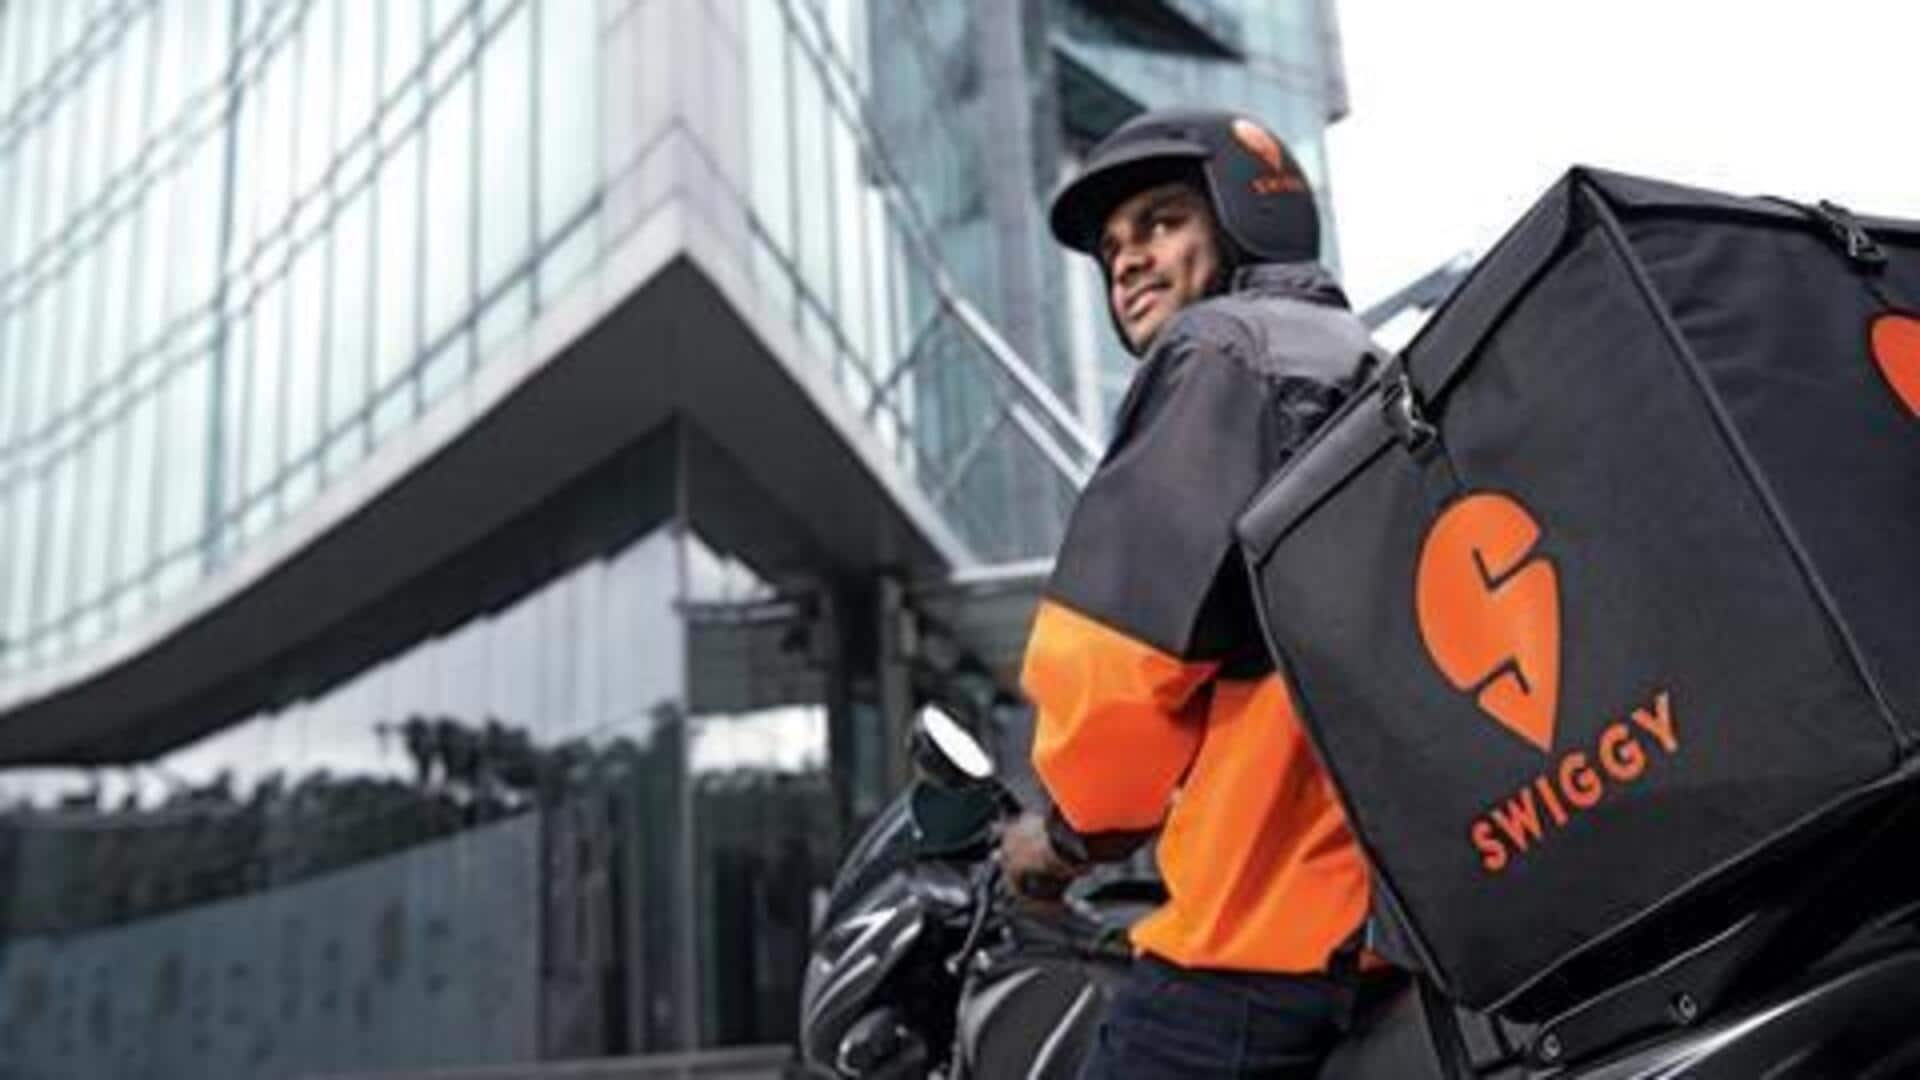 Swiggy VP quits as top executives continue to depart